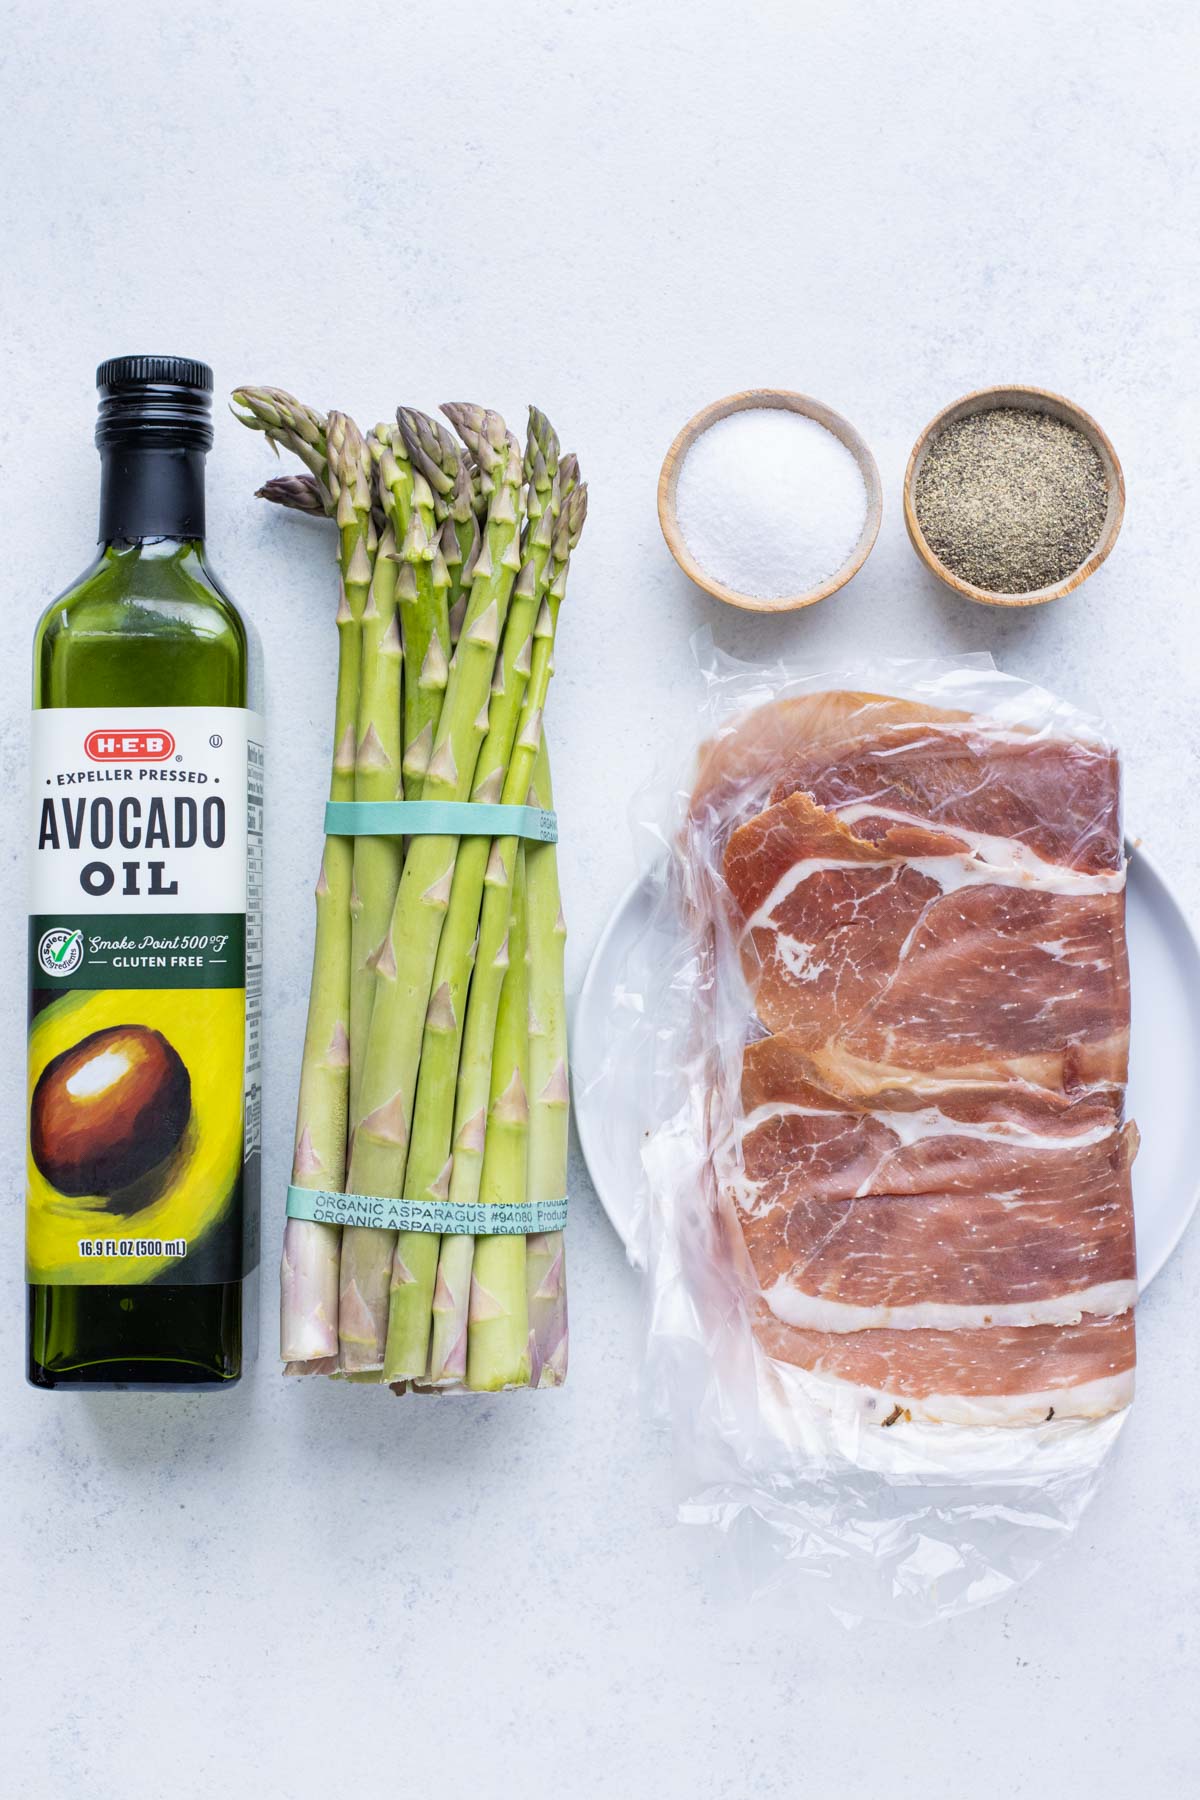 Asparagus, prosciutto, oil, salt, and pepper are the ingredients for this recipe.